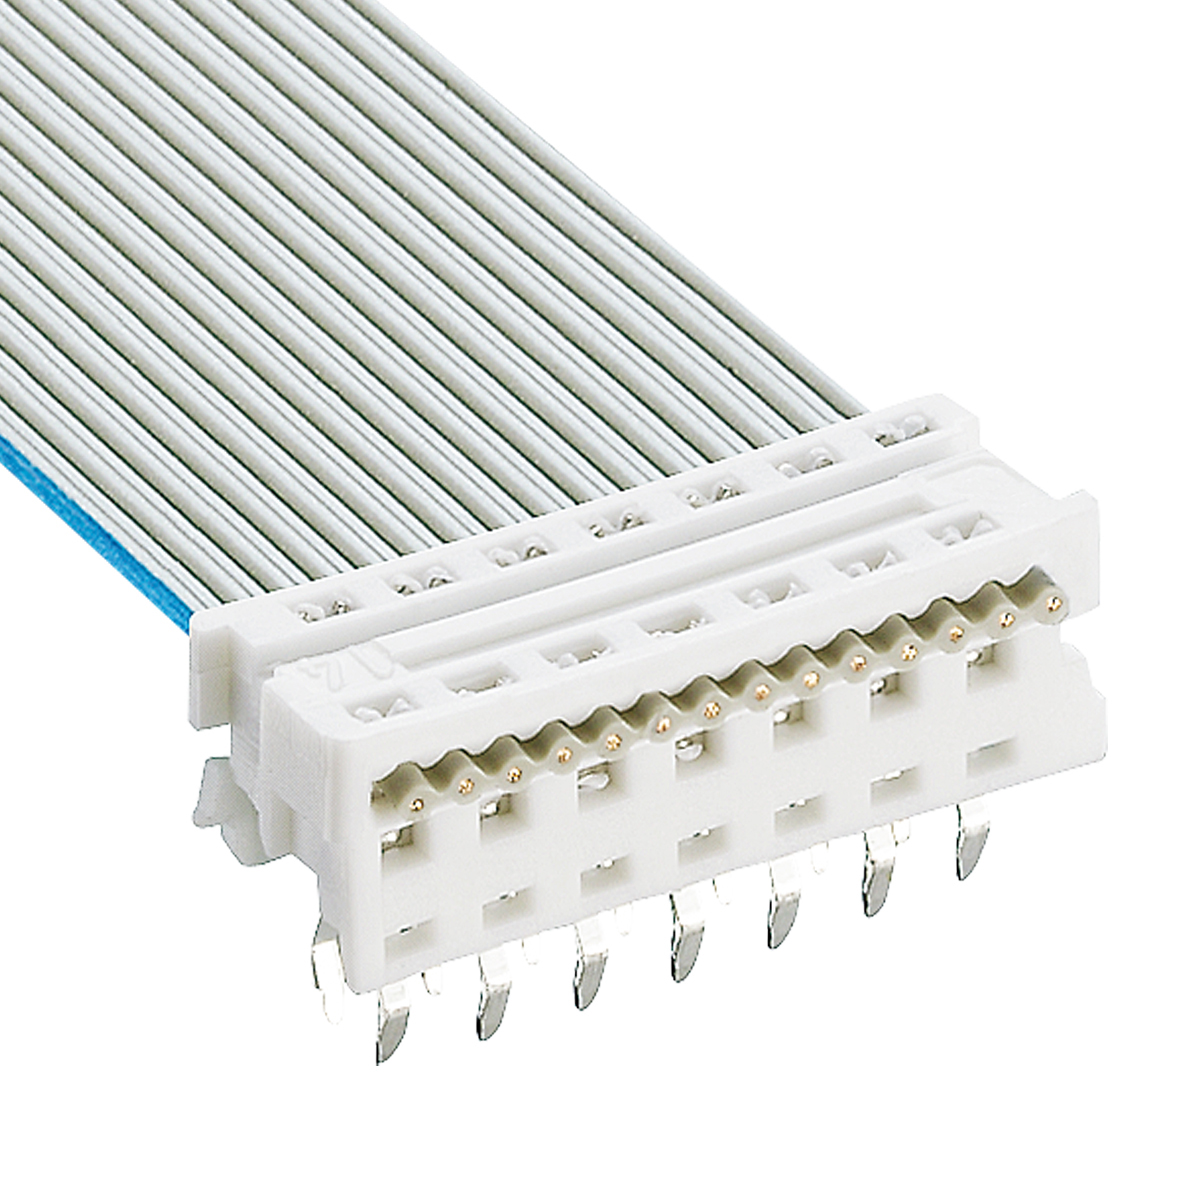 Lumberg: MICALD (Series 30 | Micromodul™ connectors, pitch 1.27 mm)